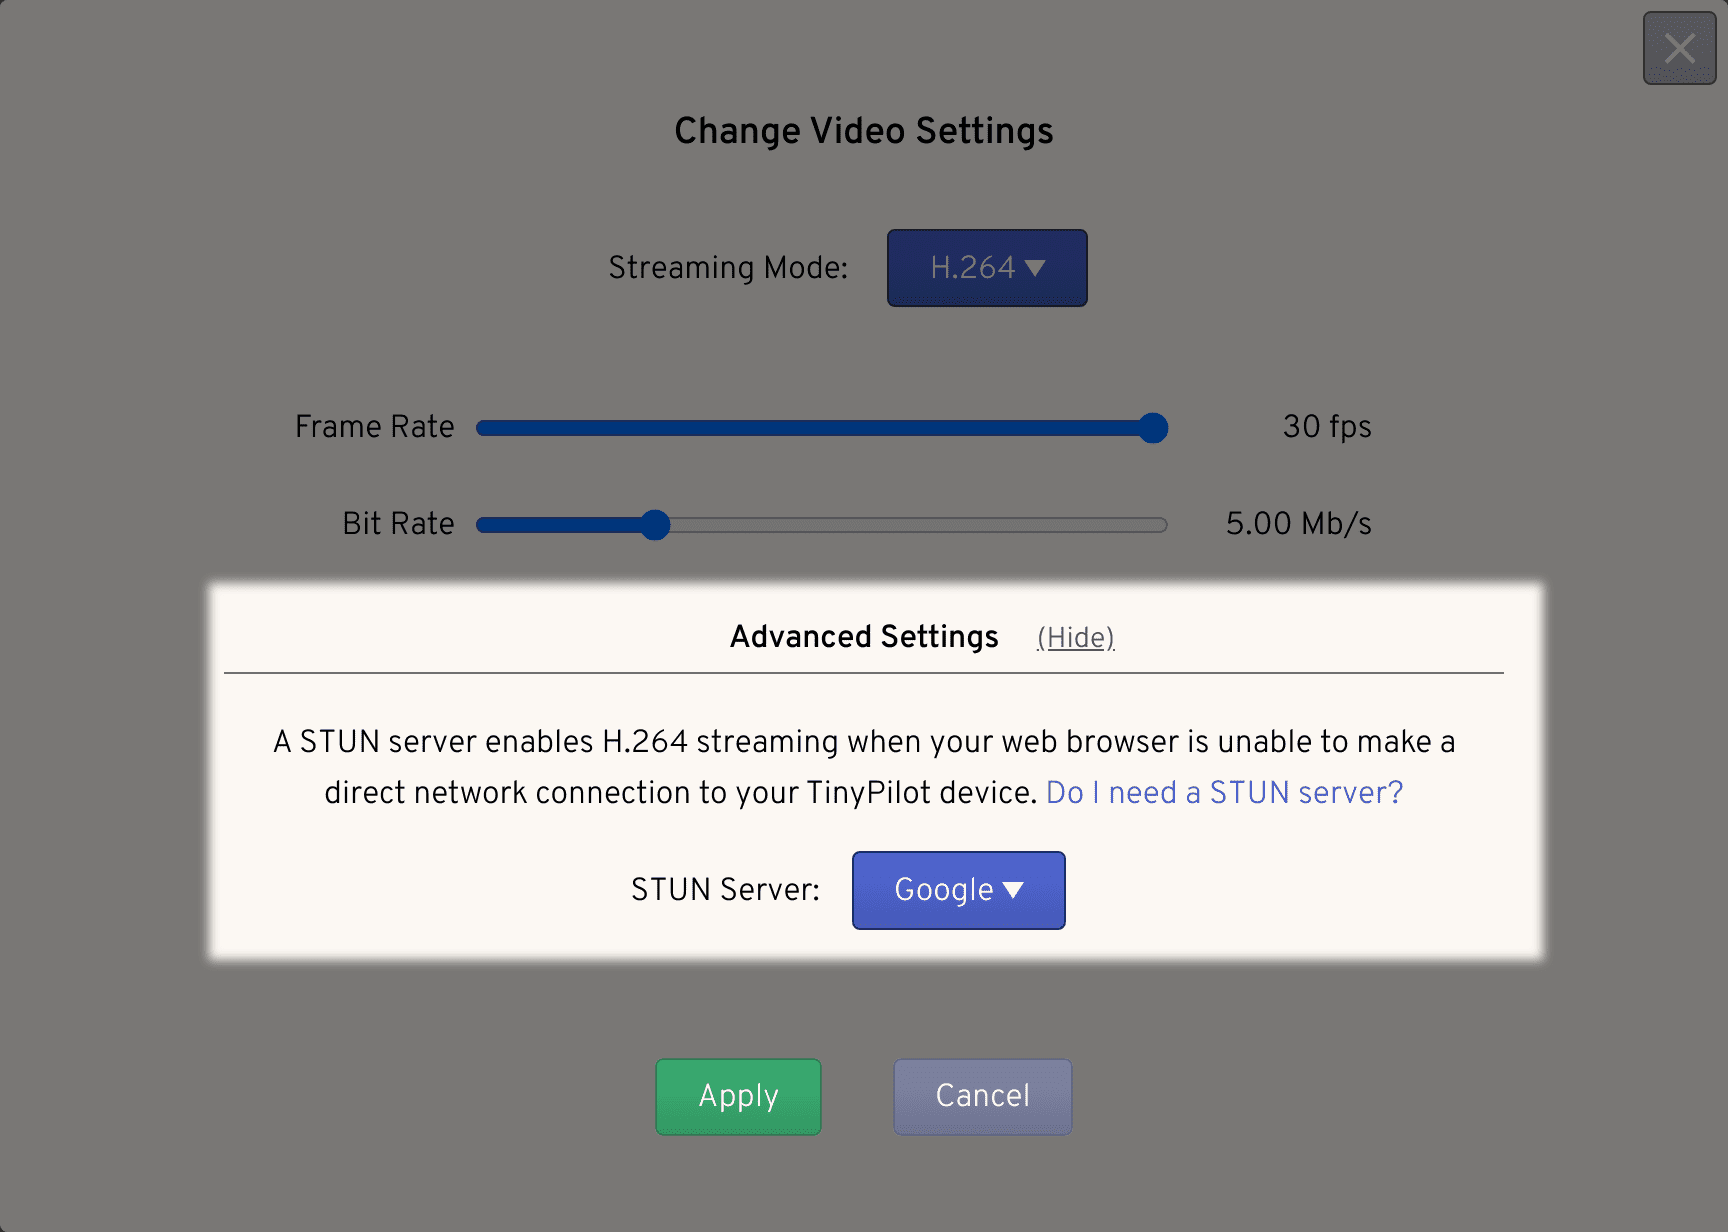 TinyPilot's Video Settings interface is open to the H.264 dialogue. The new 'Advanced settings' section is highlighted. A Google STUN server is selected.